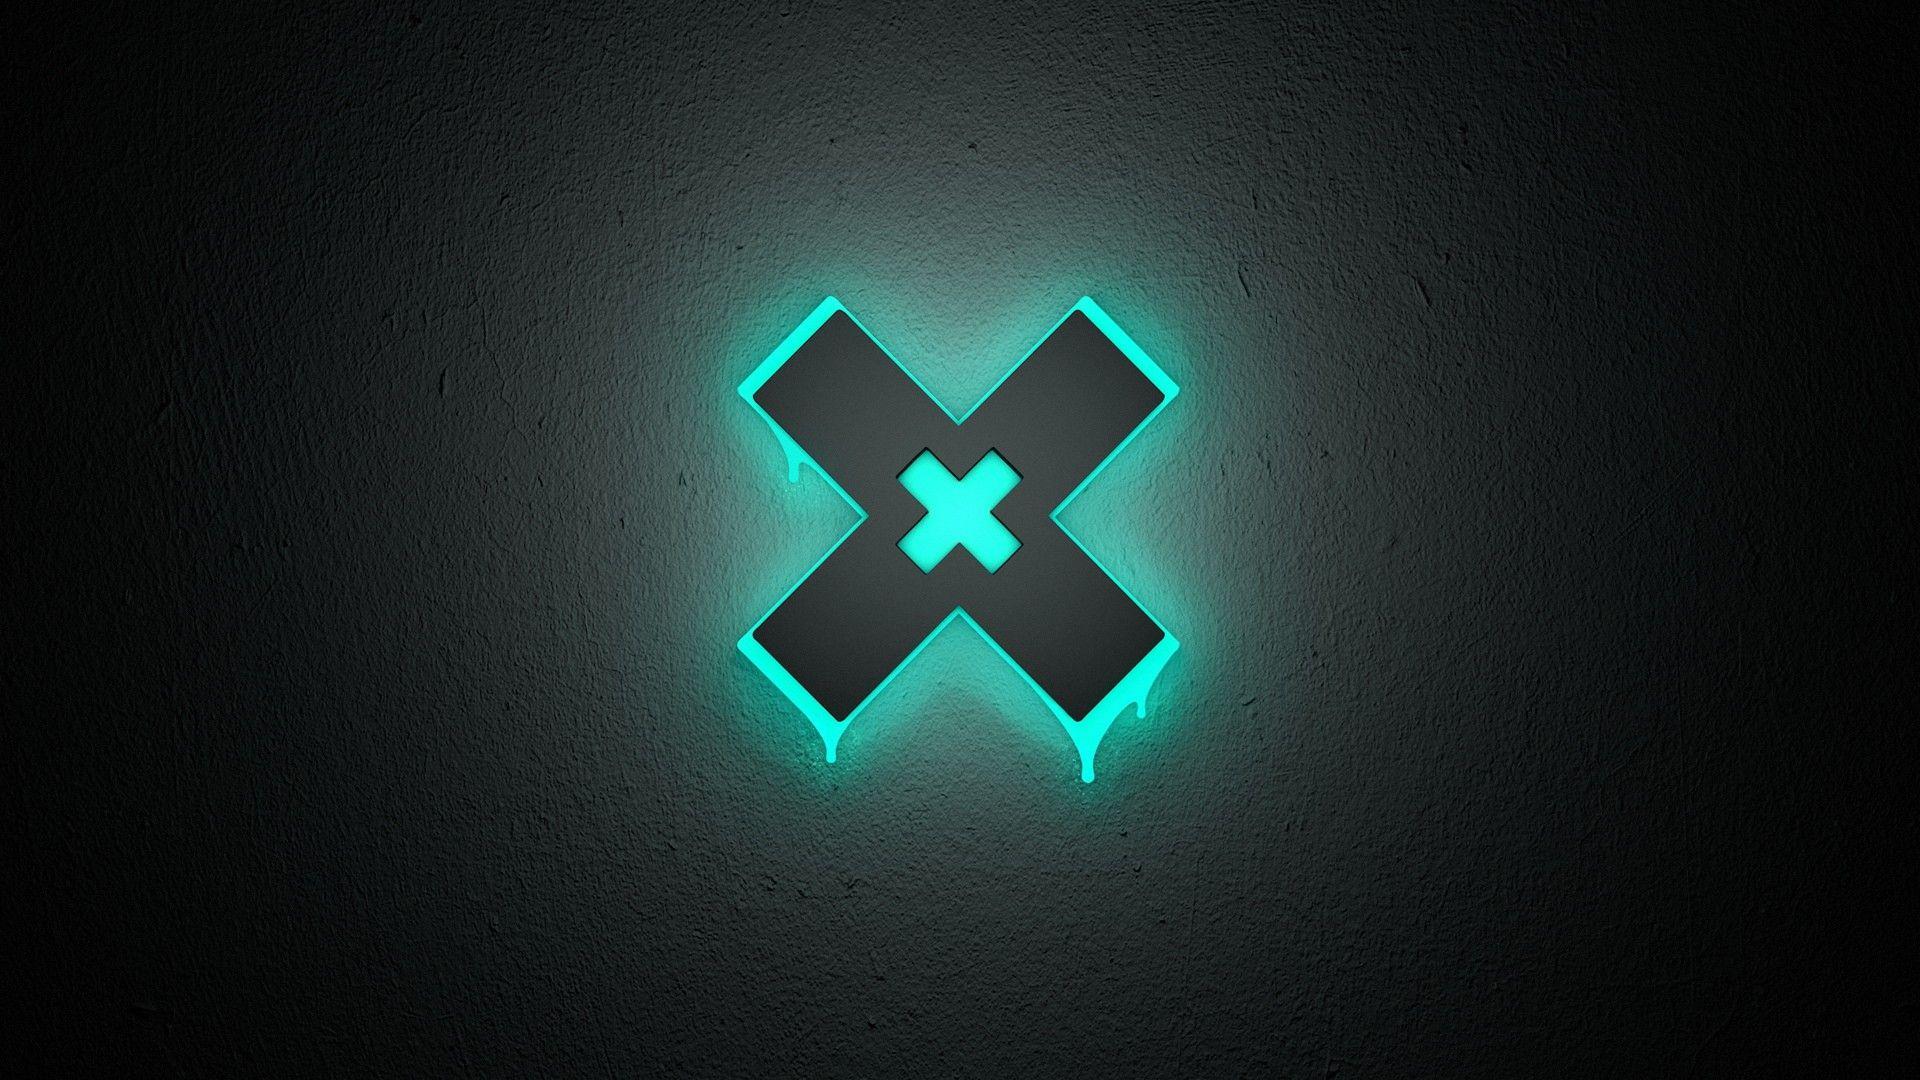 1920 X 1080 Neon Wallpapers Top Free 1920 X 1080 Neon Backgrounds Wallpaperaccess